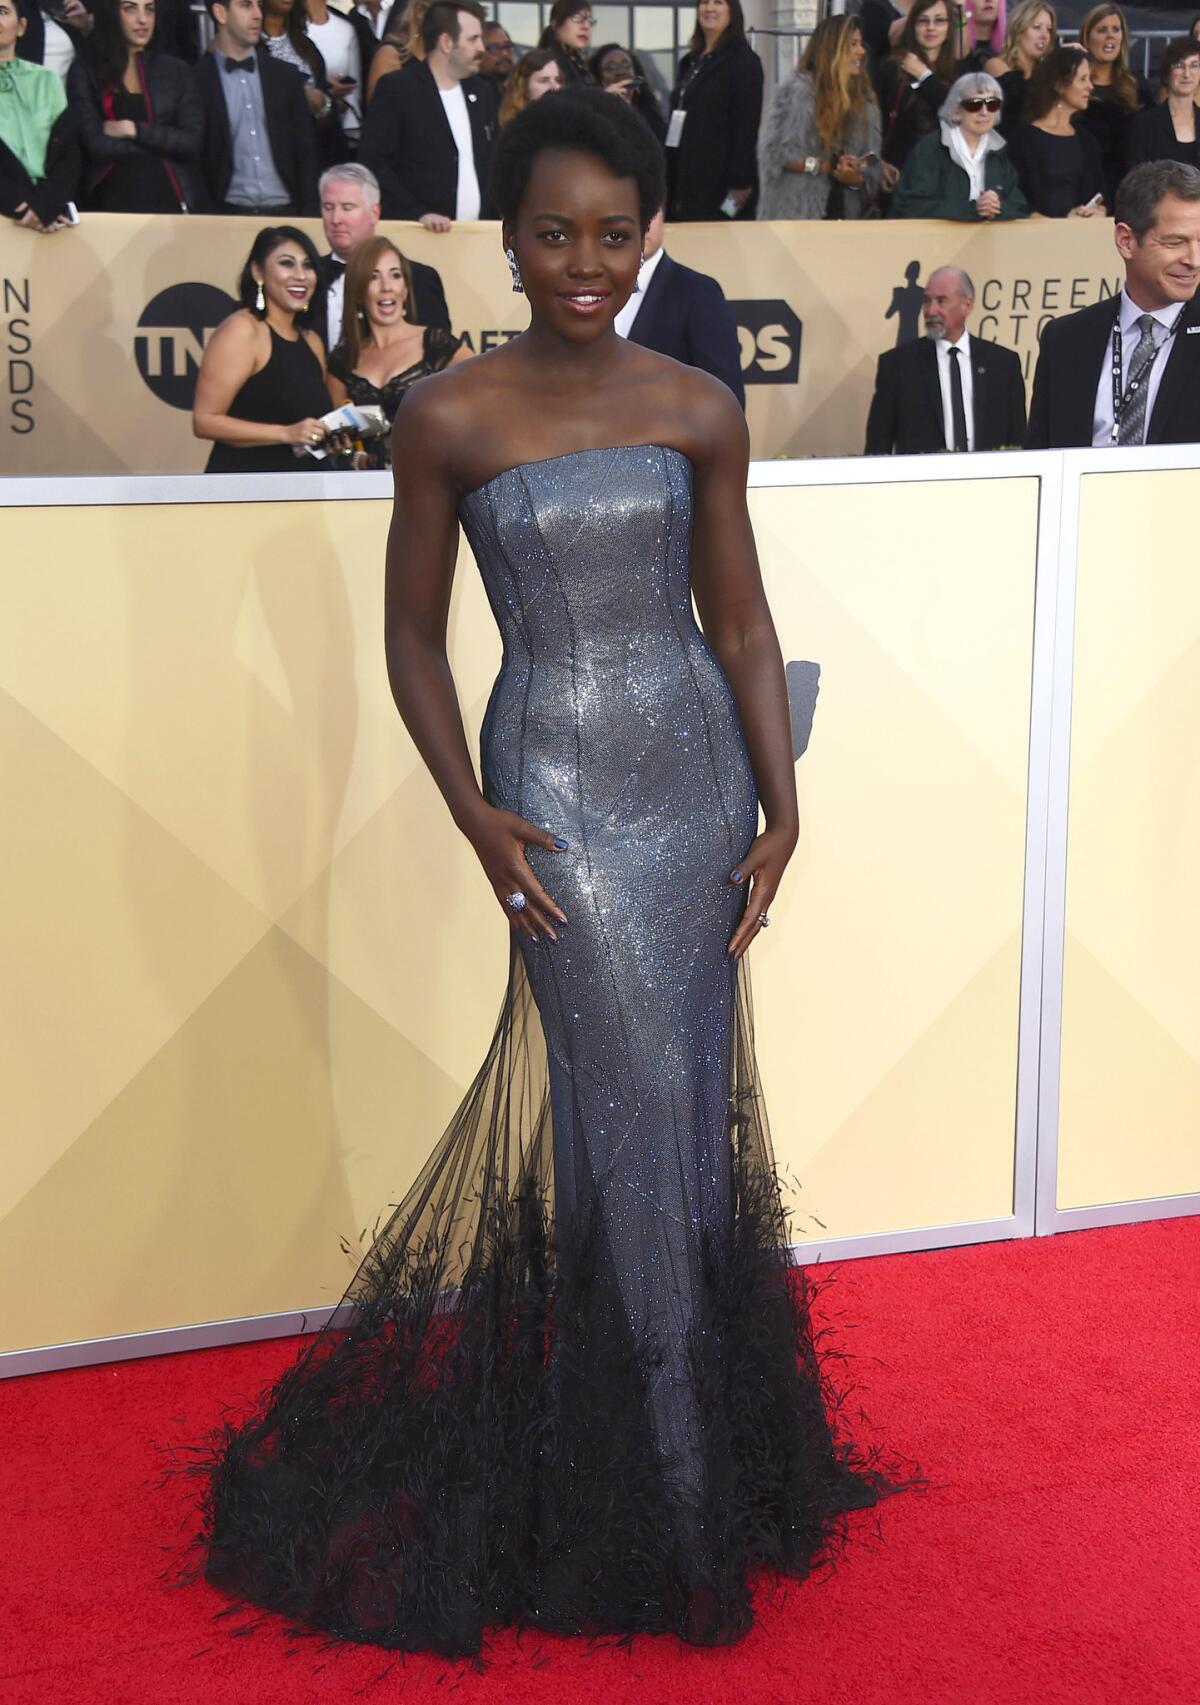 Lupita Nyong'o arrives at the 24th annual Screen Actors Guild Awards at the Shrine Auditorium & Expo Hall on Sunday, Jan. 21, 2018, in Los Angeles. (Photo by Jordan Strauss/Invision/AP)